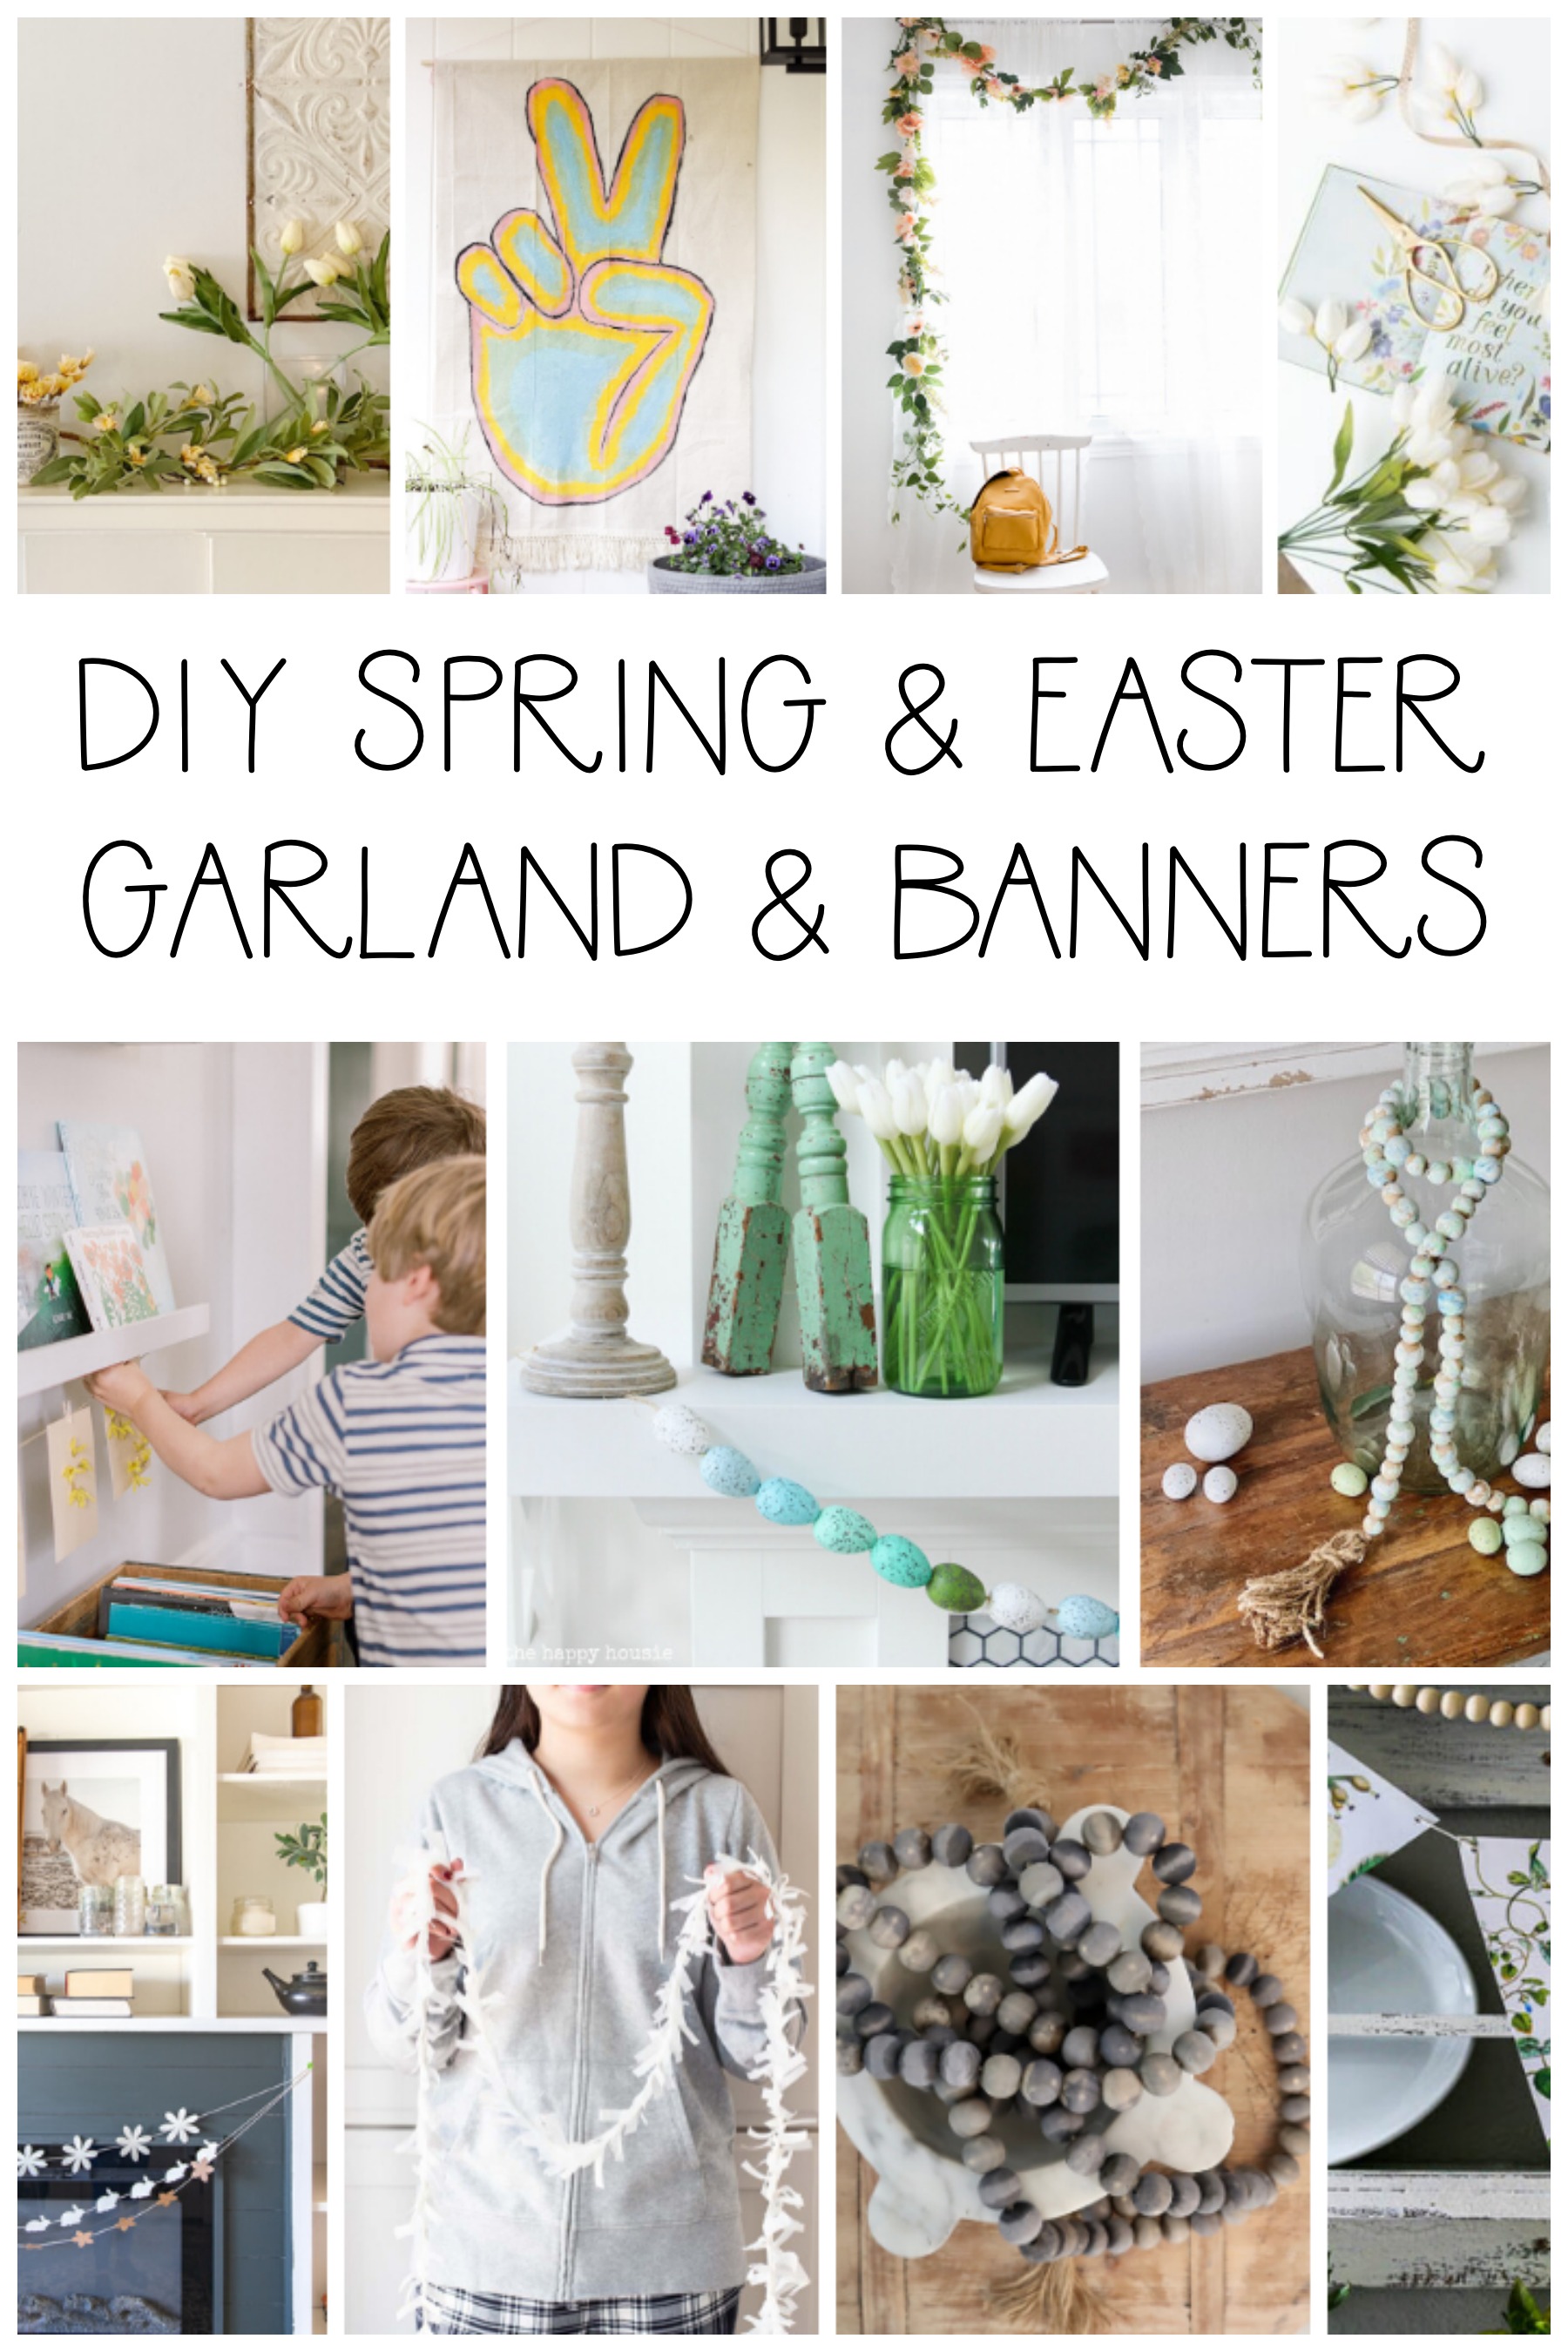 DIY spring & Easter Garland & Banners poster.